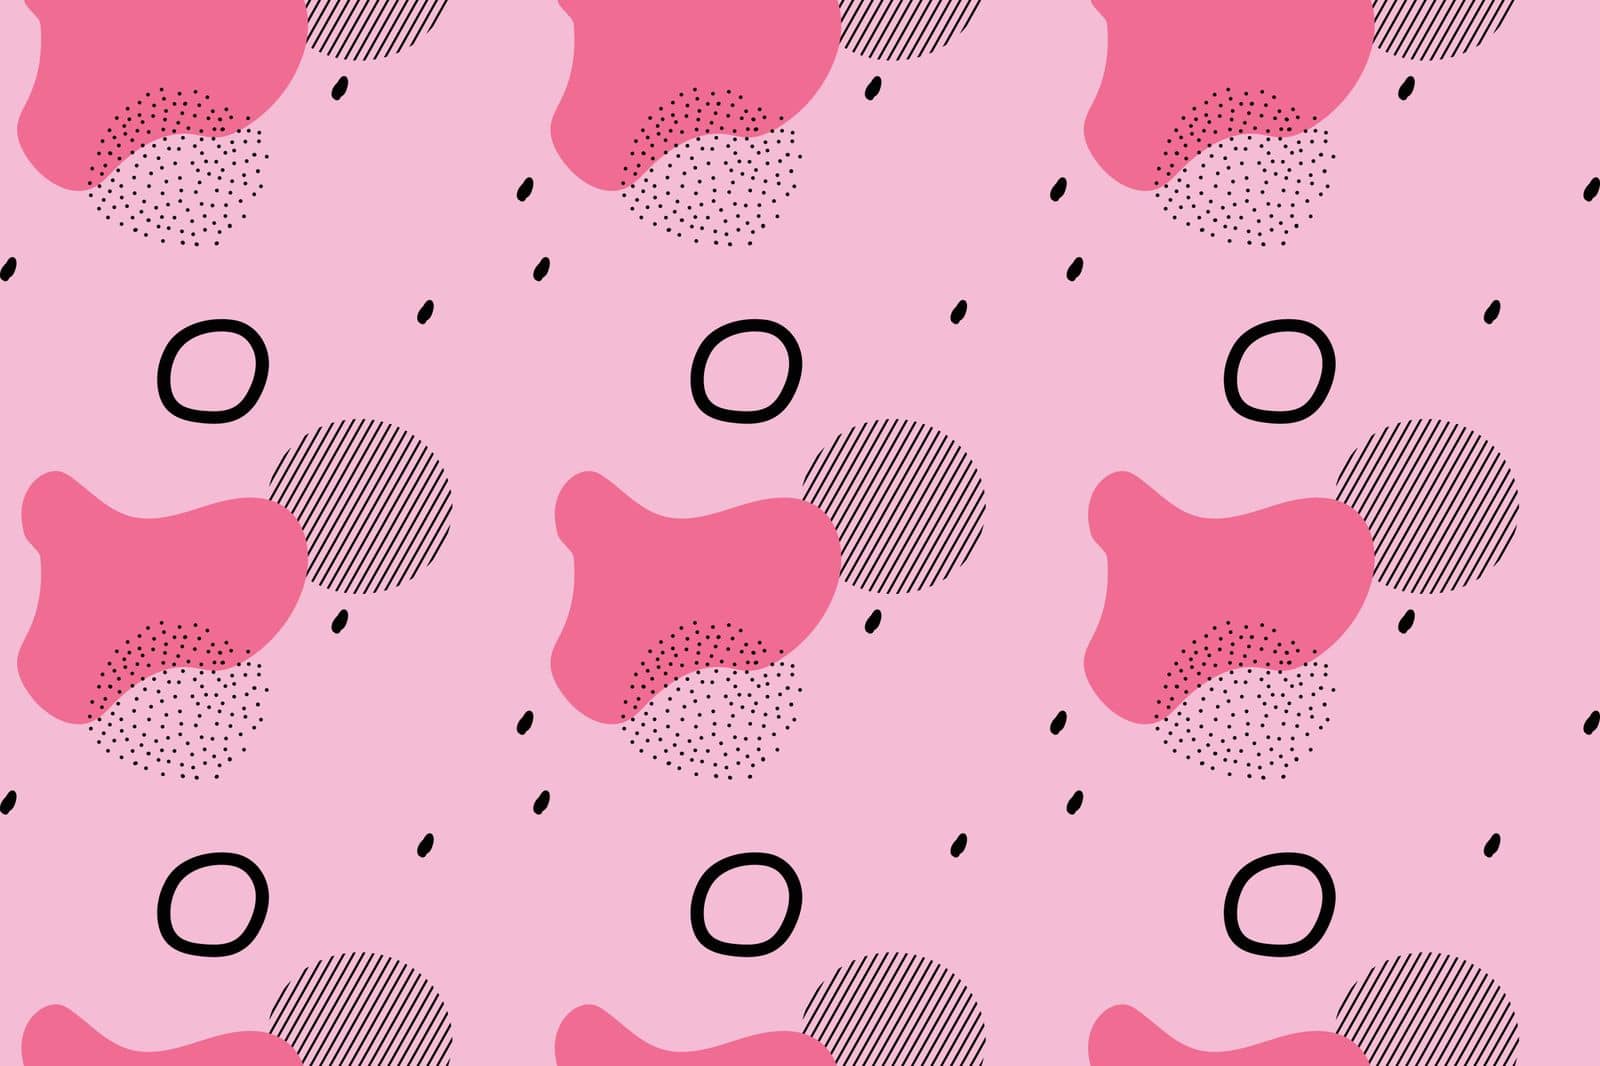 Abstract dots background. Memphis pattern. Vector Illustration. Hipster style 80s-90s pattern. Abstract colorful funky background. Ideal for fabric design, paper print and website backdrop.